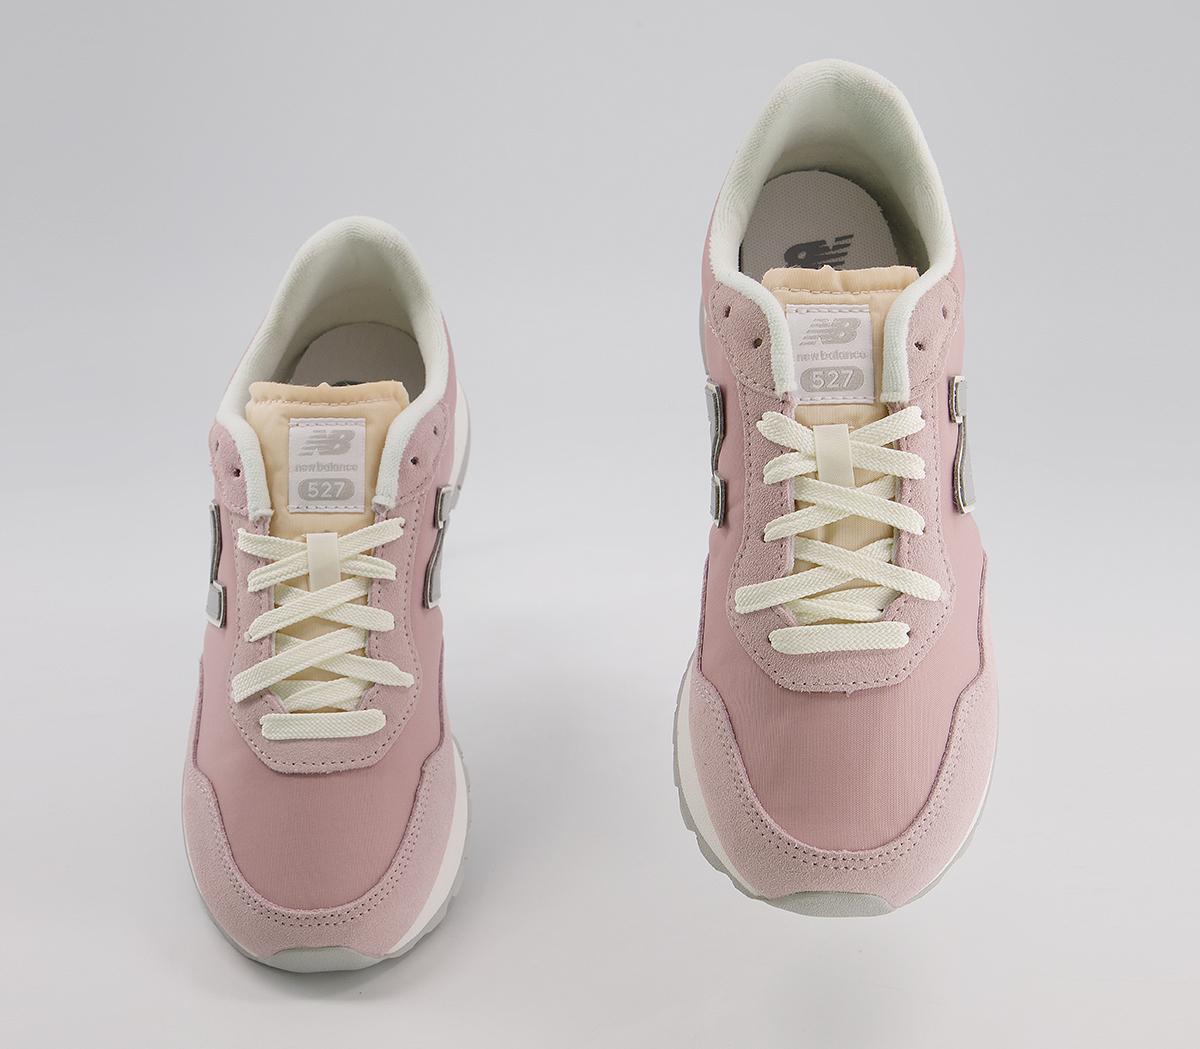 New Balance 527 Trainers Space Pink Rin Cloud - Hers trainers